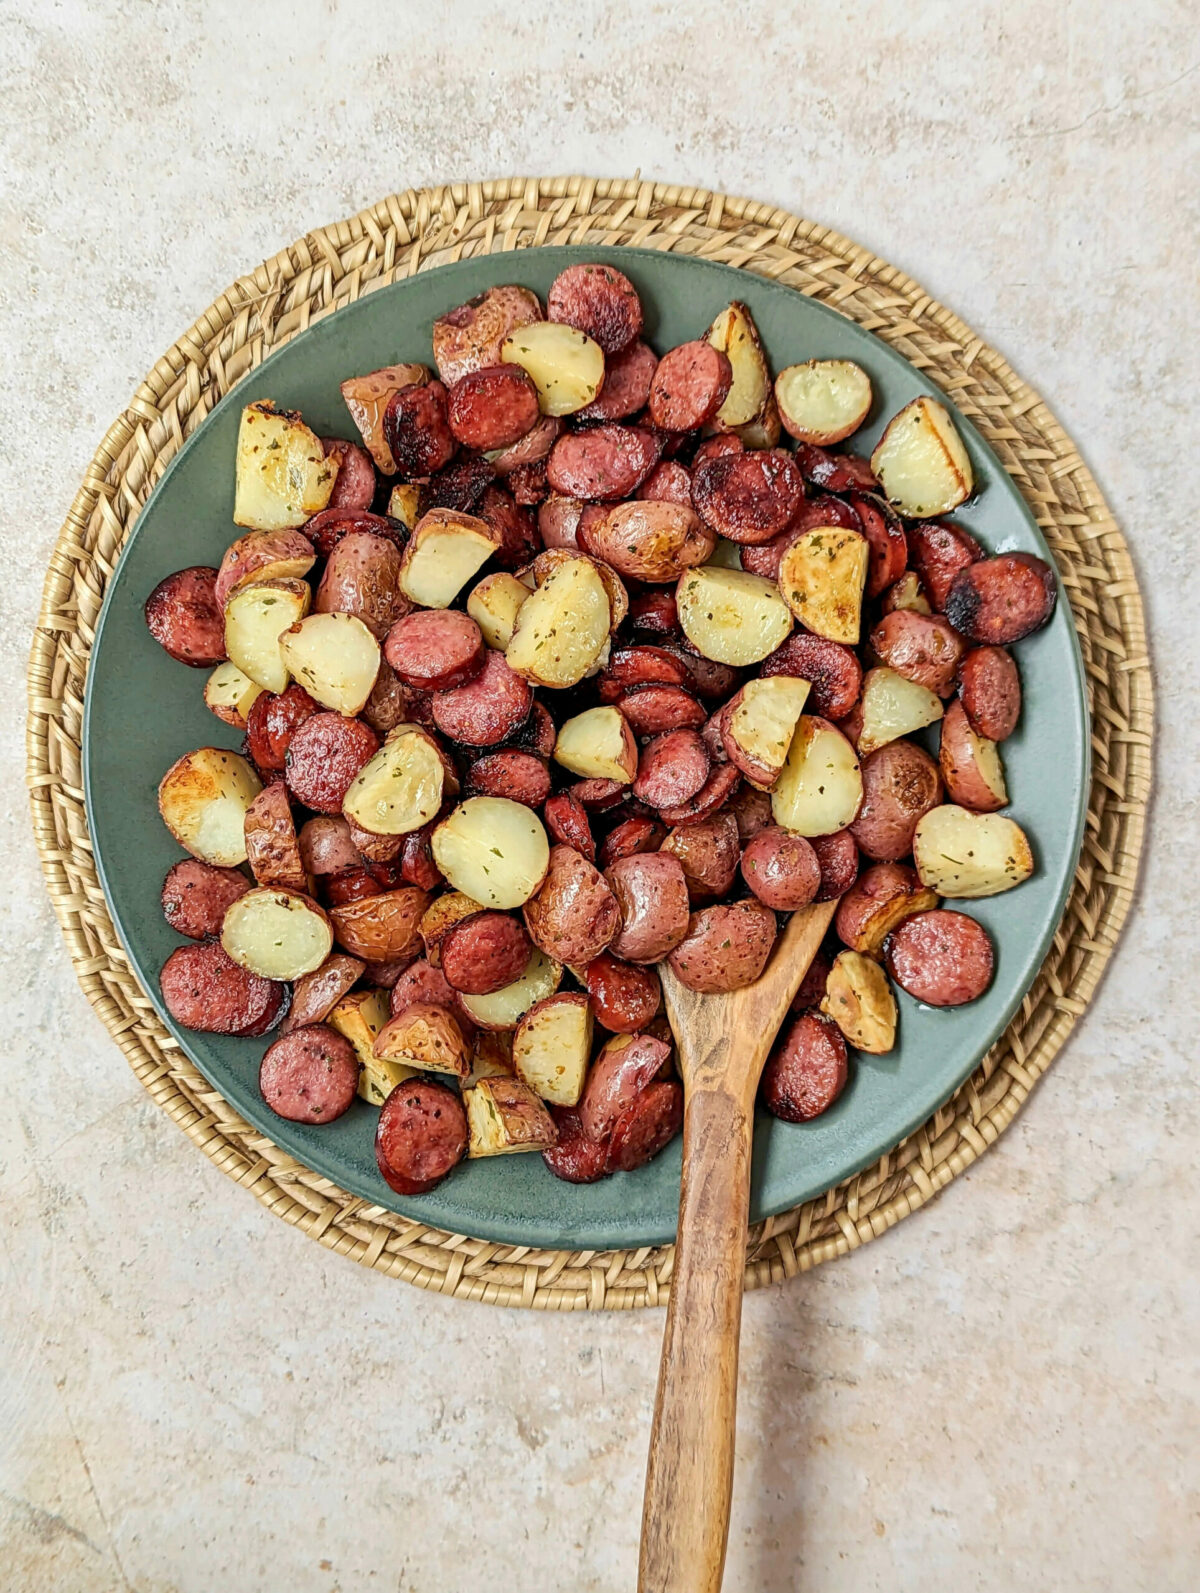 Kielbasa and potatoes on a plate with a serving spoon.